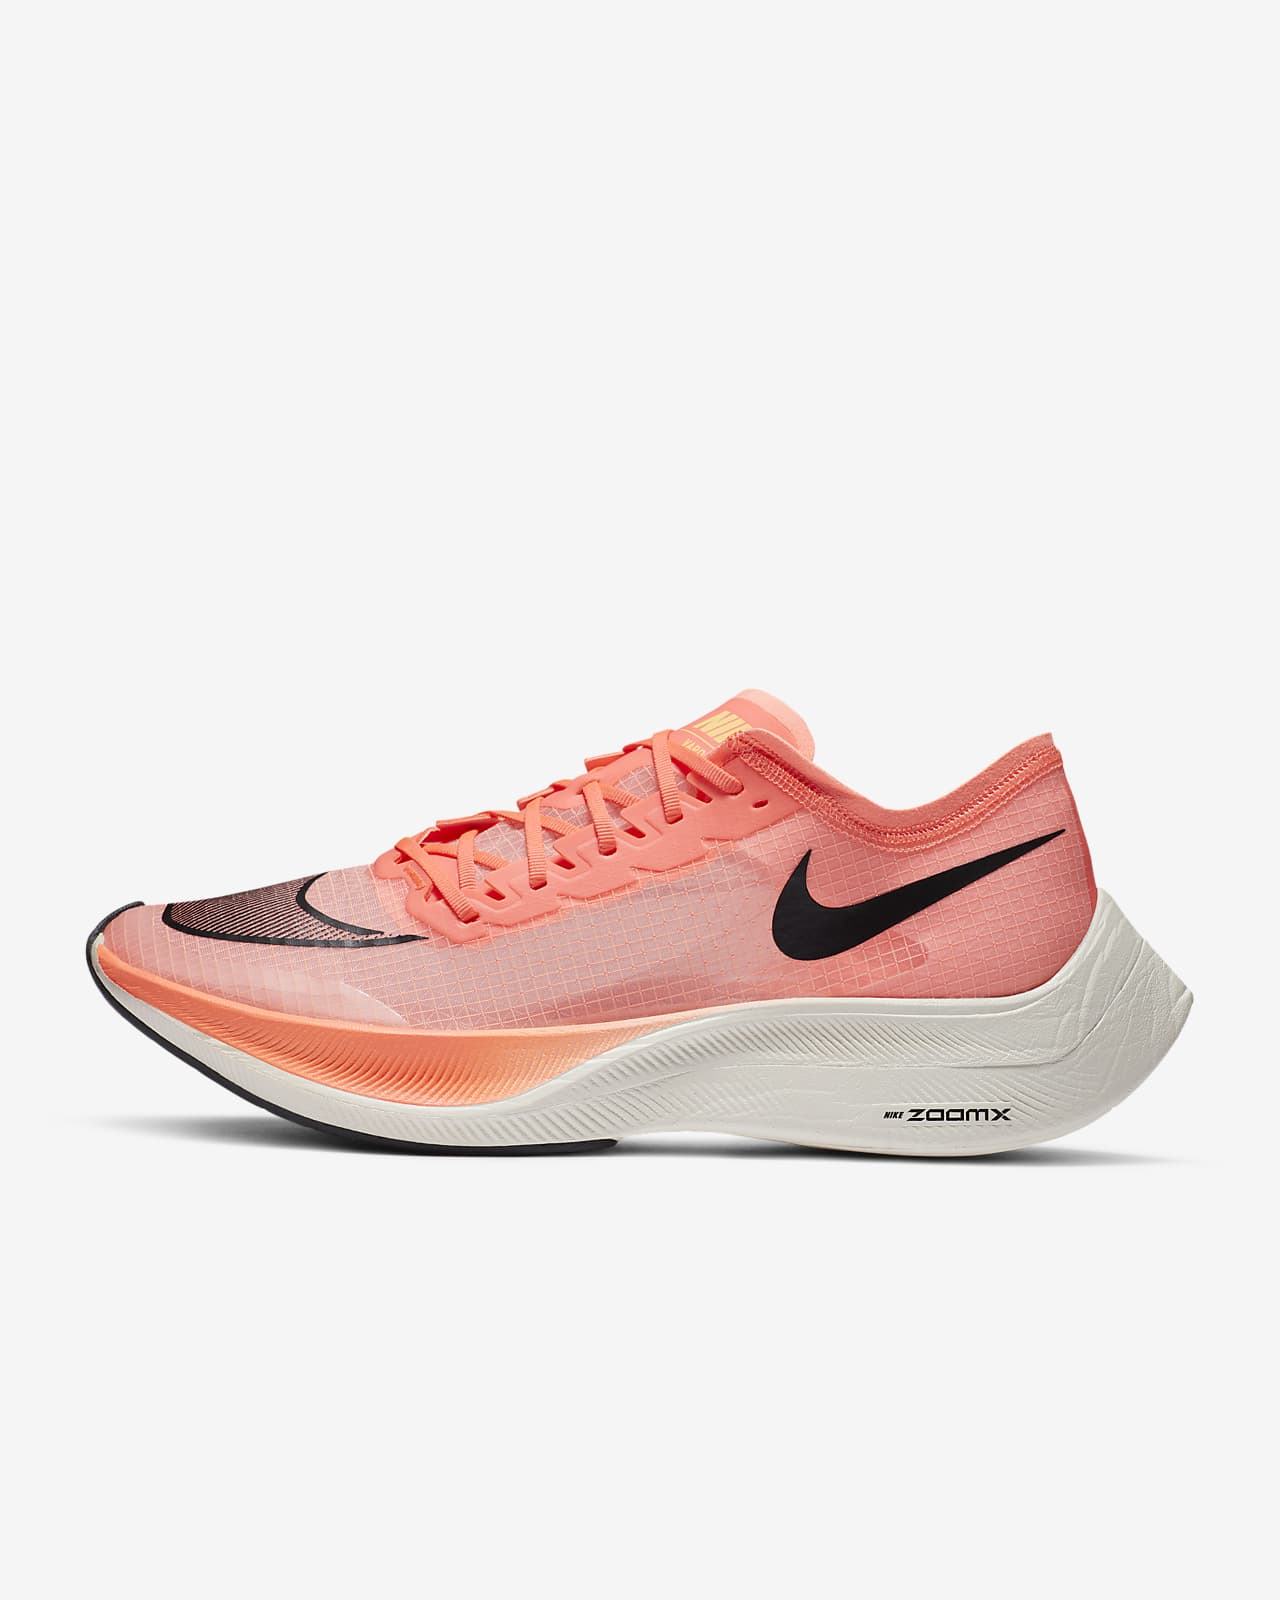 vaporfly next sold out